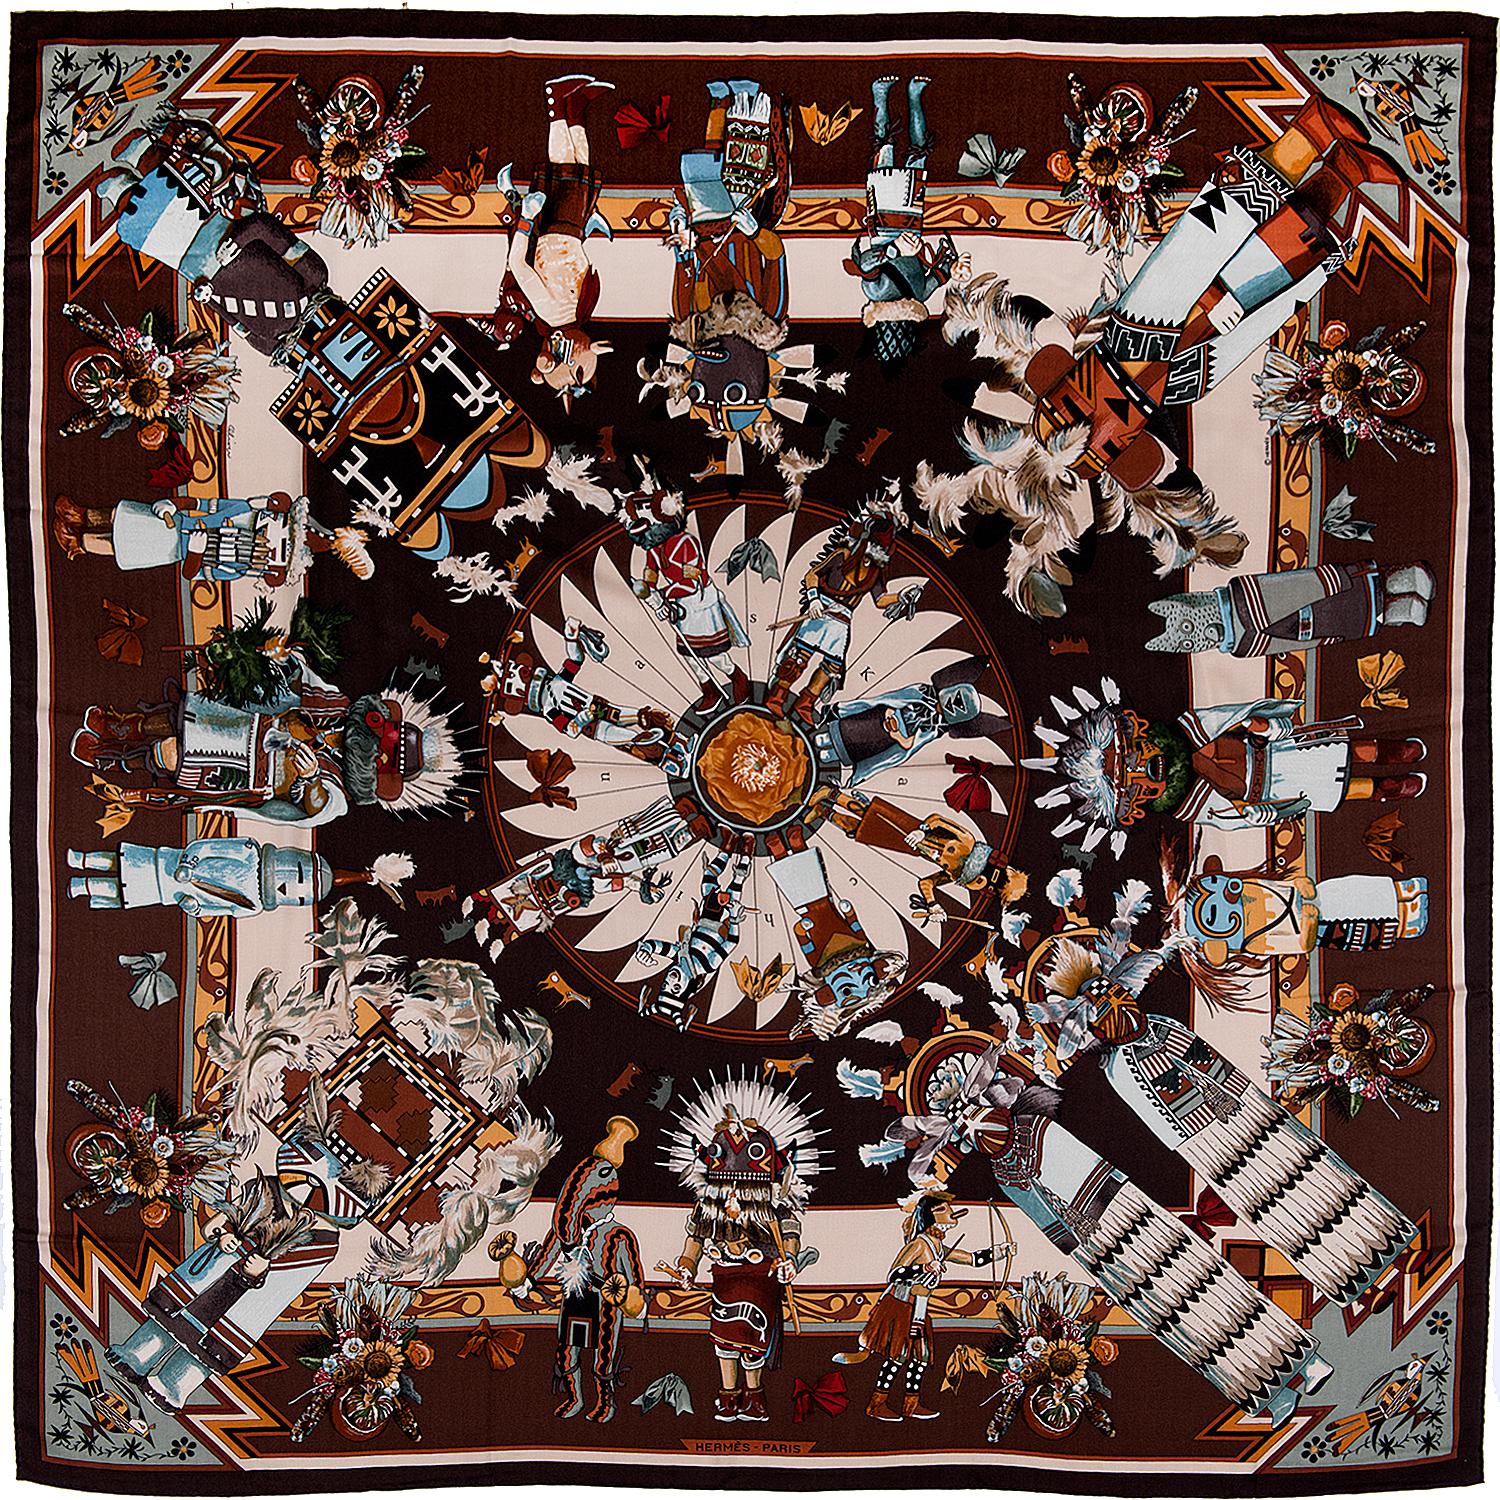 This fabulous Vintage Silk & Cashmere Shawl, 'Kachinas' was designed by Kermit Oliver in 1992. On a chocolate brown ground, the Shawl measures 54in. x 54in. - comes with it's Hermes box and is in absolutely pristine condition.